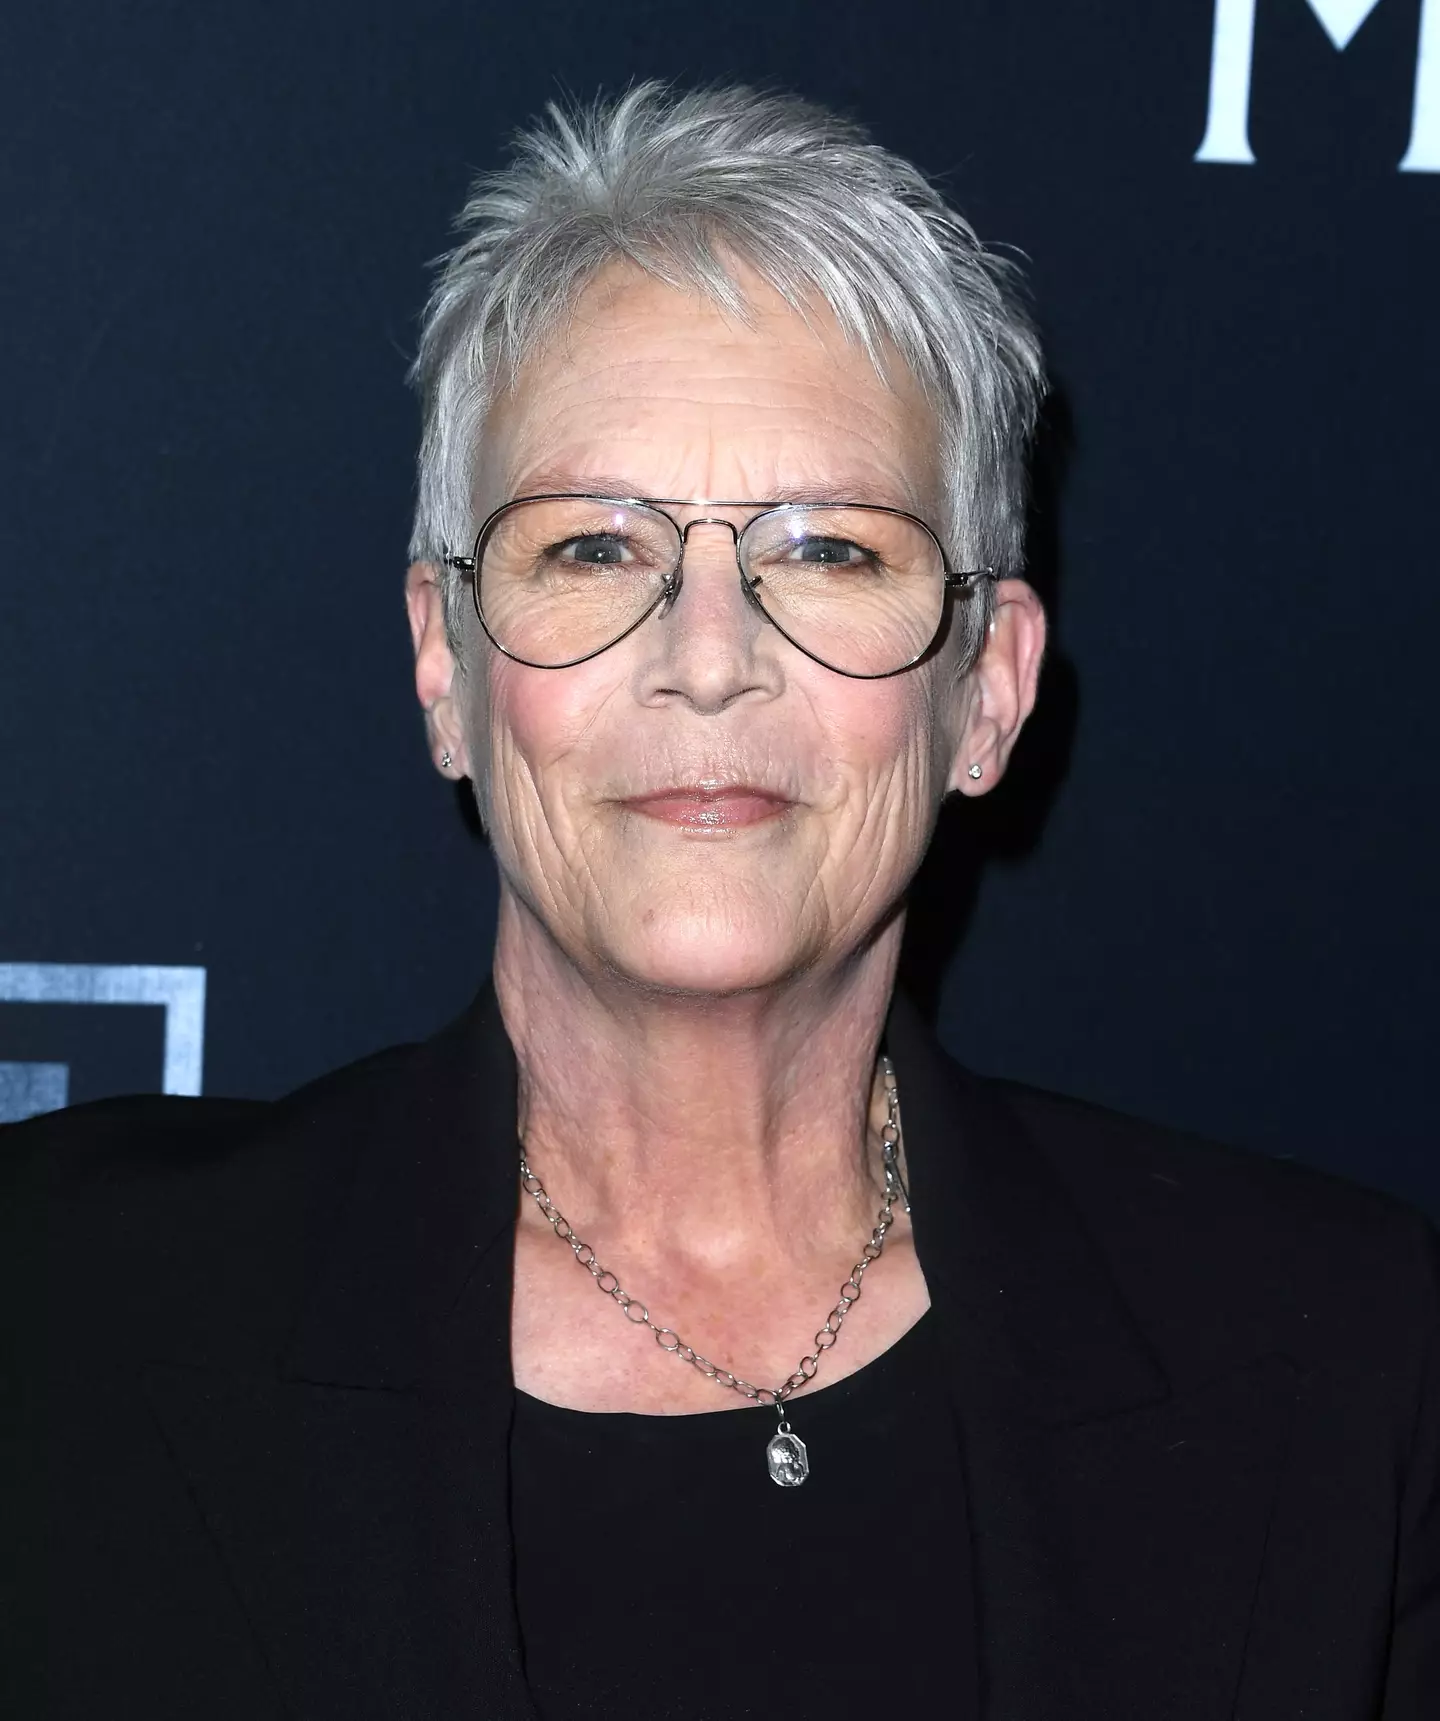 Jamie Lee Curtis has been a voice for trans rights in recent years.